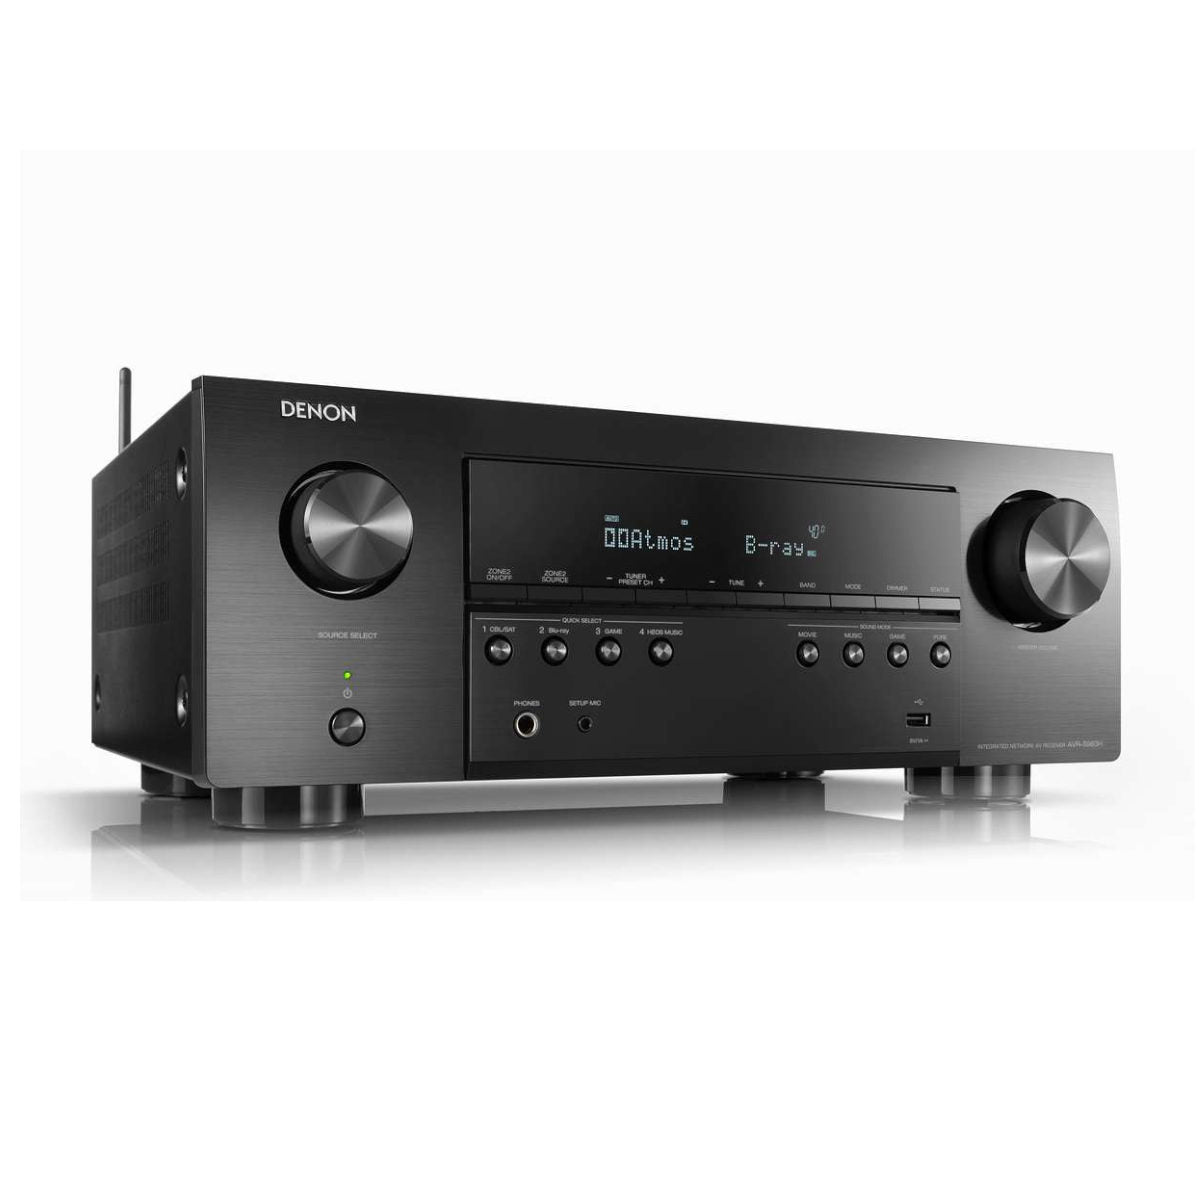 Denon AVR-S960H 7.2ch 8K AV Receiver with 3D Audio, Voice Control and HEOS® Built-in - Angled View